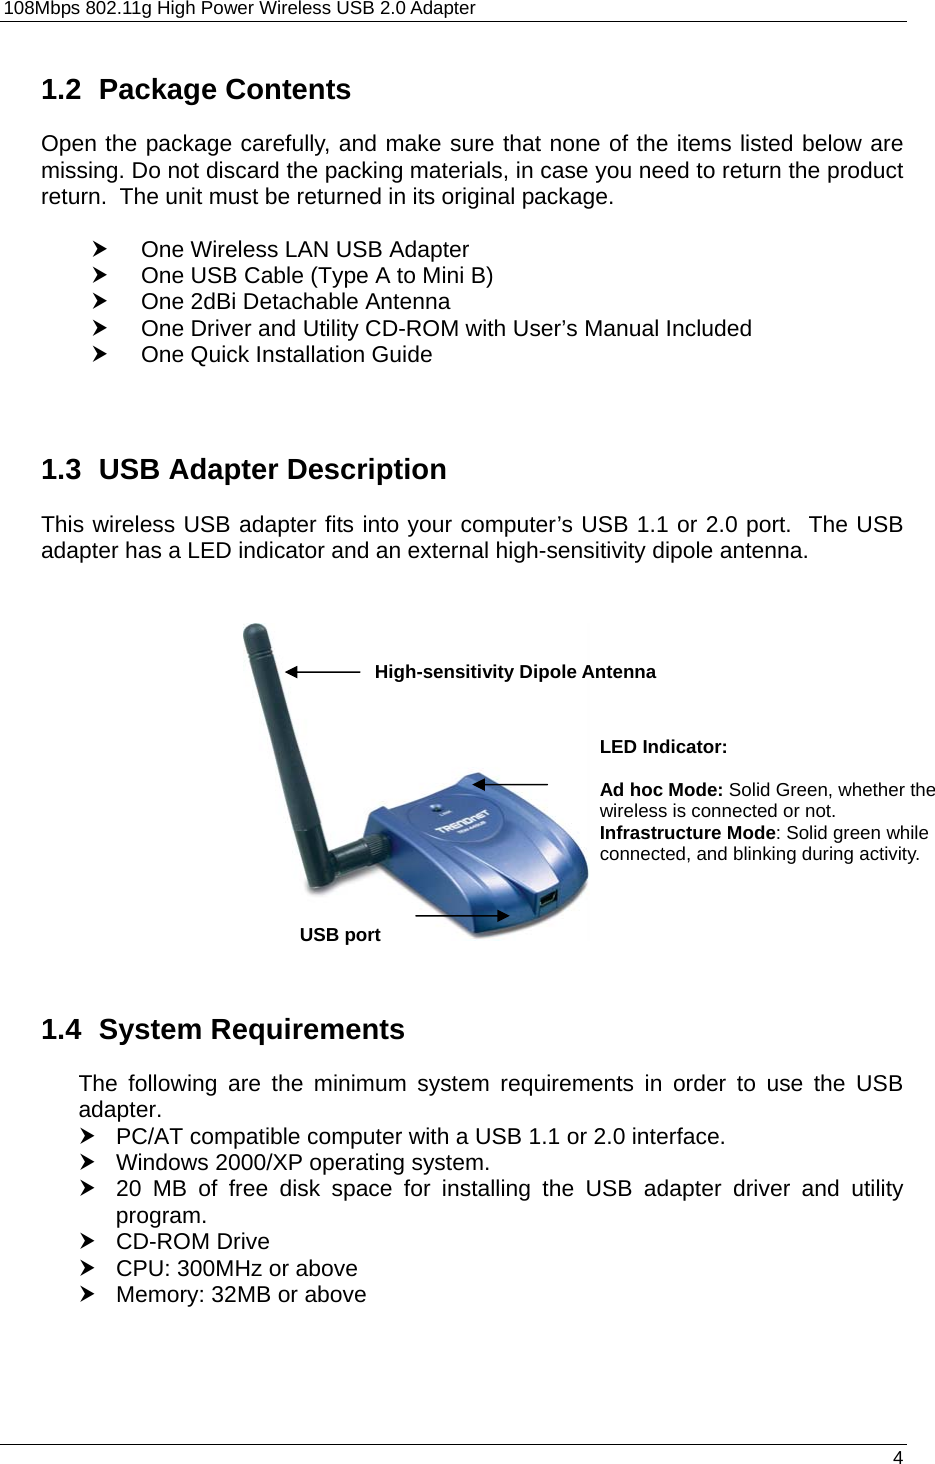 108Mbps 802.11g High Power Wireless USB 2.0 Adapter       4  1.2 Package Contents Open the package carefully, and make sure that none of the items listed below are missing. Do not discard the packing materials, in case you need to return the product return.  The unit must be returned in its original package.  h  One Wireless LAN USB Adapter h  One USB Cable (Type A to Mini B) h  One 2dBi Detachable Antenna h  One Driver and Utility CD-ROM with User’s Manual Included h  One Quick Installation Guide   1.3  USB Adapter Description This wireless USB adapter fits into your computer’s USB 1.1 or 2.0 port.  The USB adapter has a LED indicator and an external high-sensitivity dipole antenna.                   1.4 System Requirements The following are the minimum system requirements in order to use the USB adapter. h  PC/AT compatible computer with a USB 1.1 or 2.0 interface. h  Windows 2000/XP operating system. h  20 MB of free disk space for installing the USB adapter driver and utility program. h CD-ROM Drive h  CPU: 300MHz or above h  Memory: 32MB or above  USB portHigh-sensitivity Dipole Antenna LED Indicator:   Ad hoc Mode: Solid Green, whether the wireless is connected or not. Infrastructure Mode: Solid green while connected, and blinking during activity. 